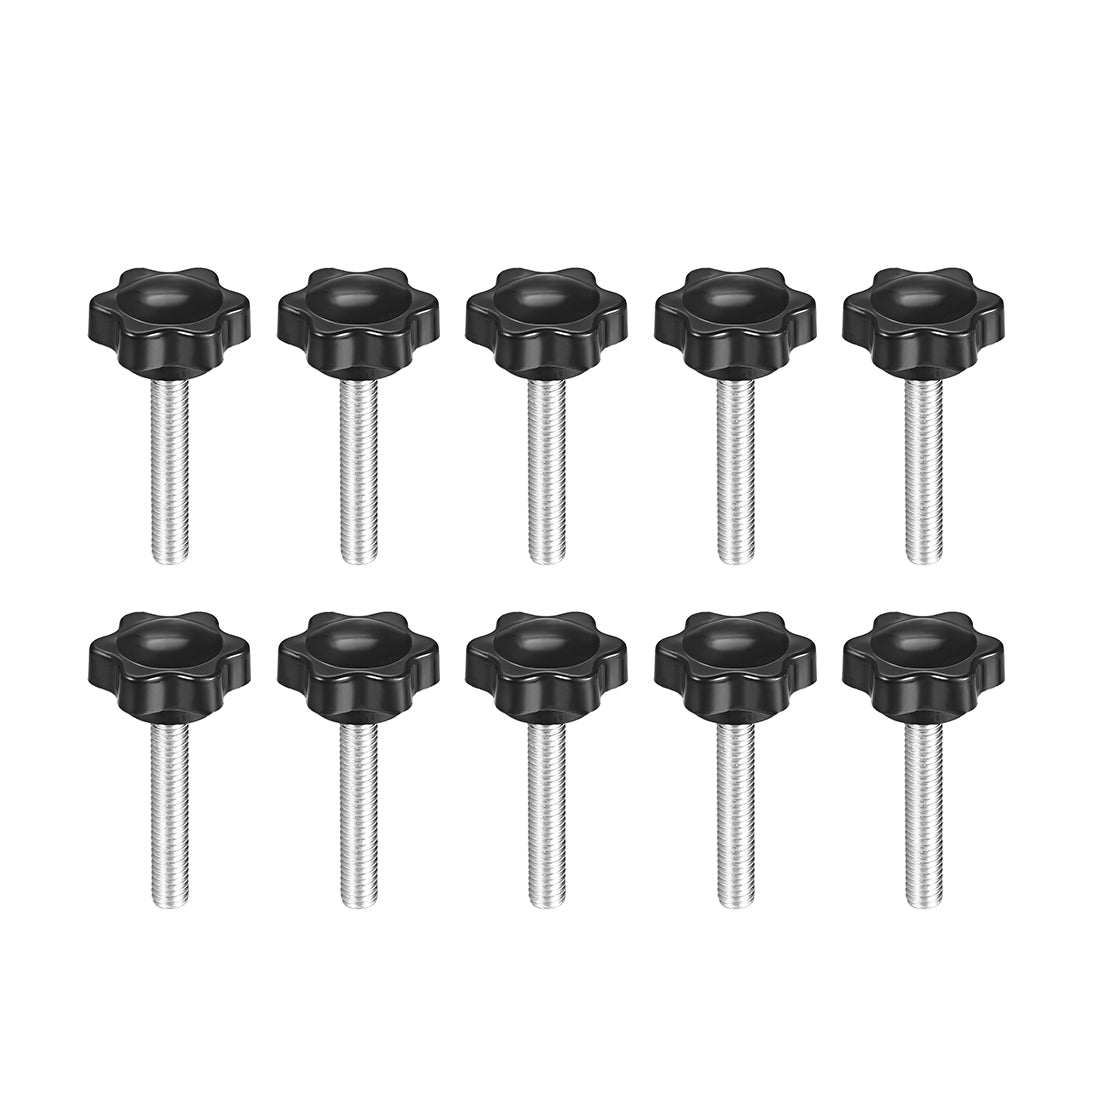 uxcell Uxcell Clamping Screw Knob Plum Hex Shaped Grips Star Knob Male Thread, 10Pcs